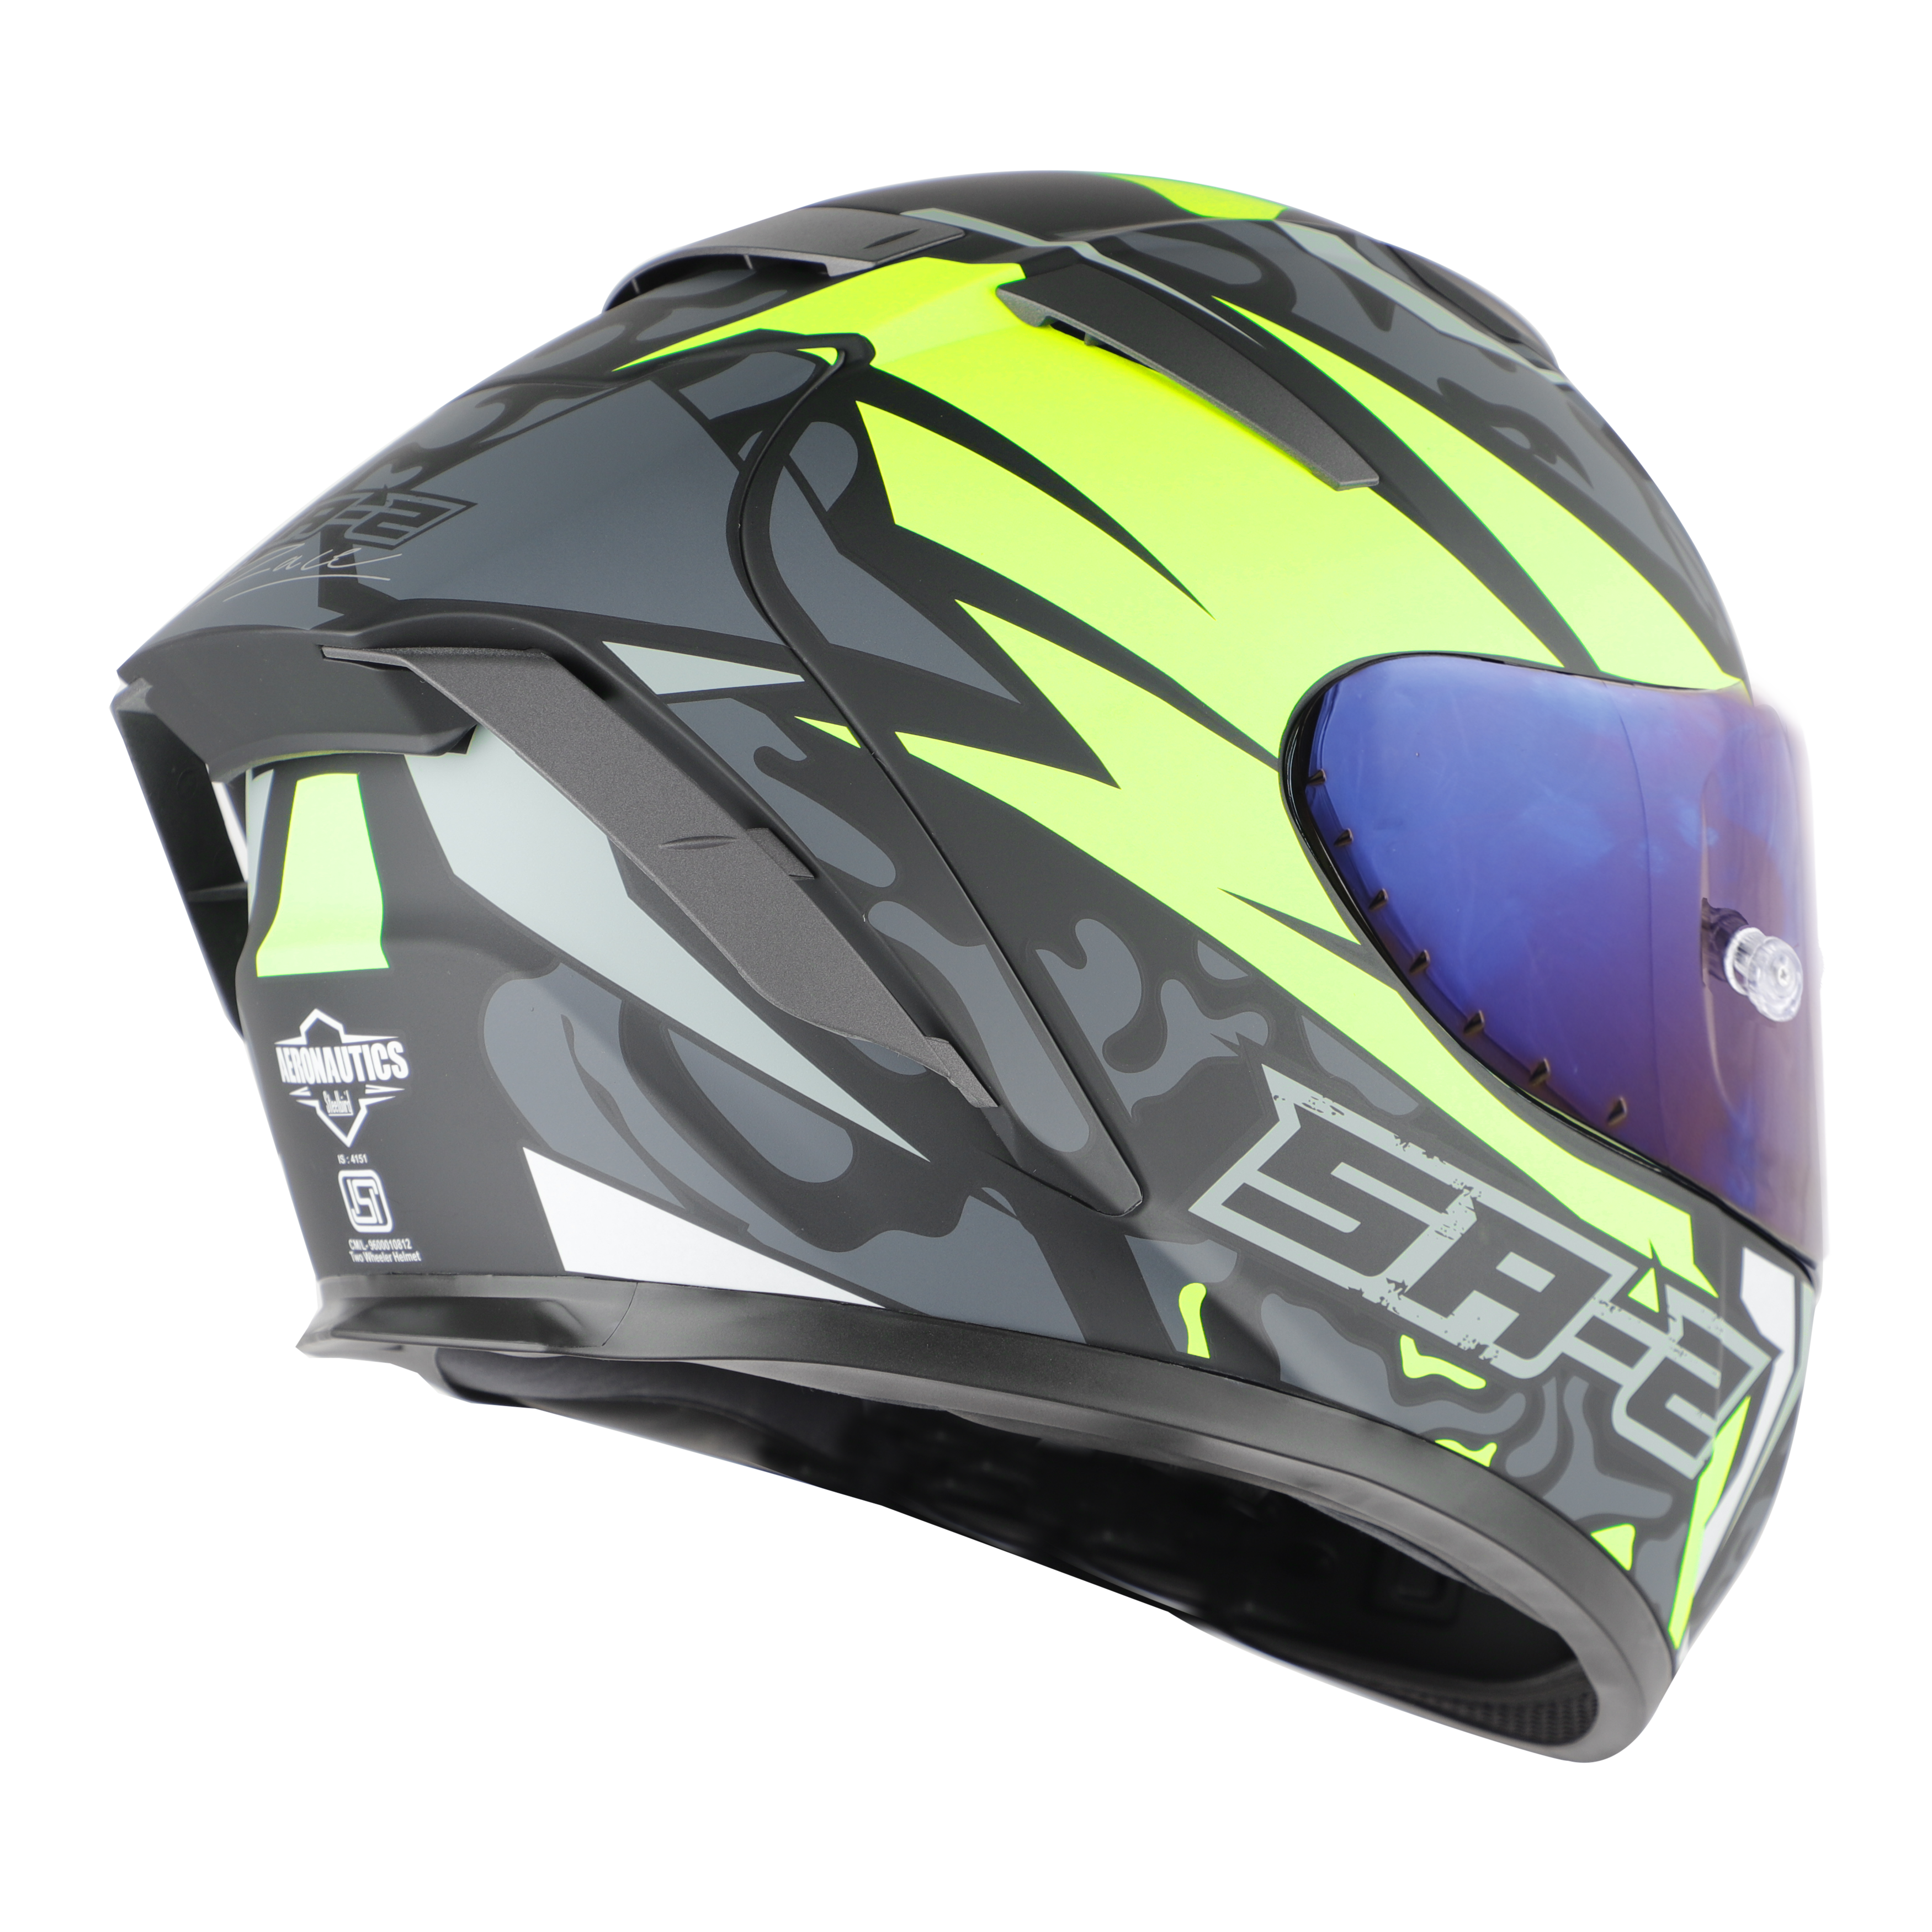 SA-2 TERMINATOR 3.0 MAT BLACK WITH NEON FITTED WITH CLEAR VISOR EXTRA BLUE CHROME VISOR FREE (WITH ANTI-FOR SHIELD HOLDER)